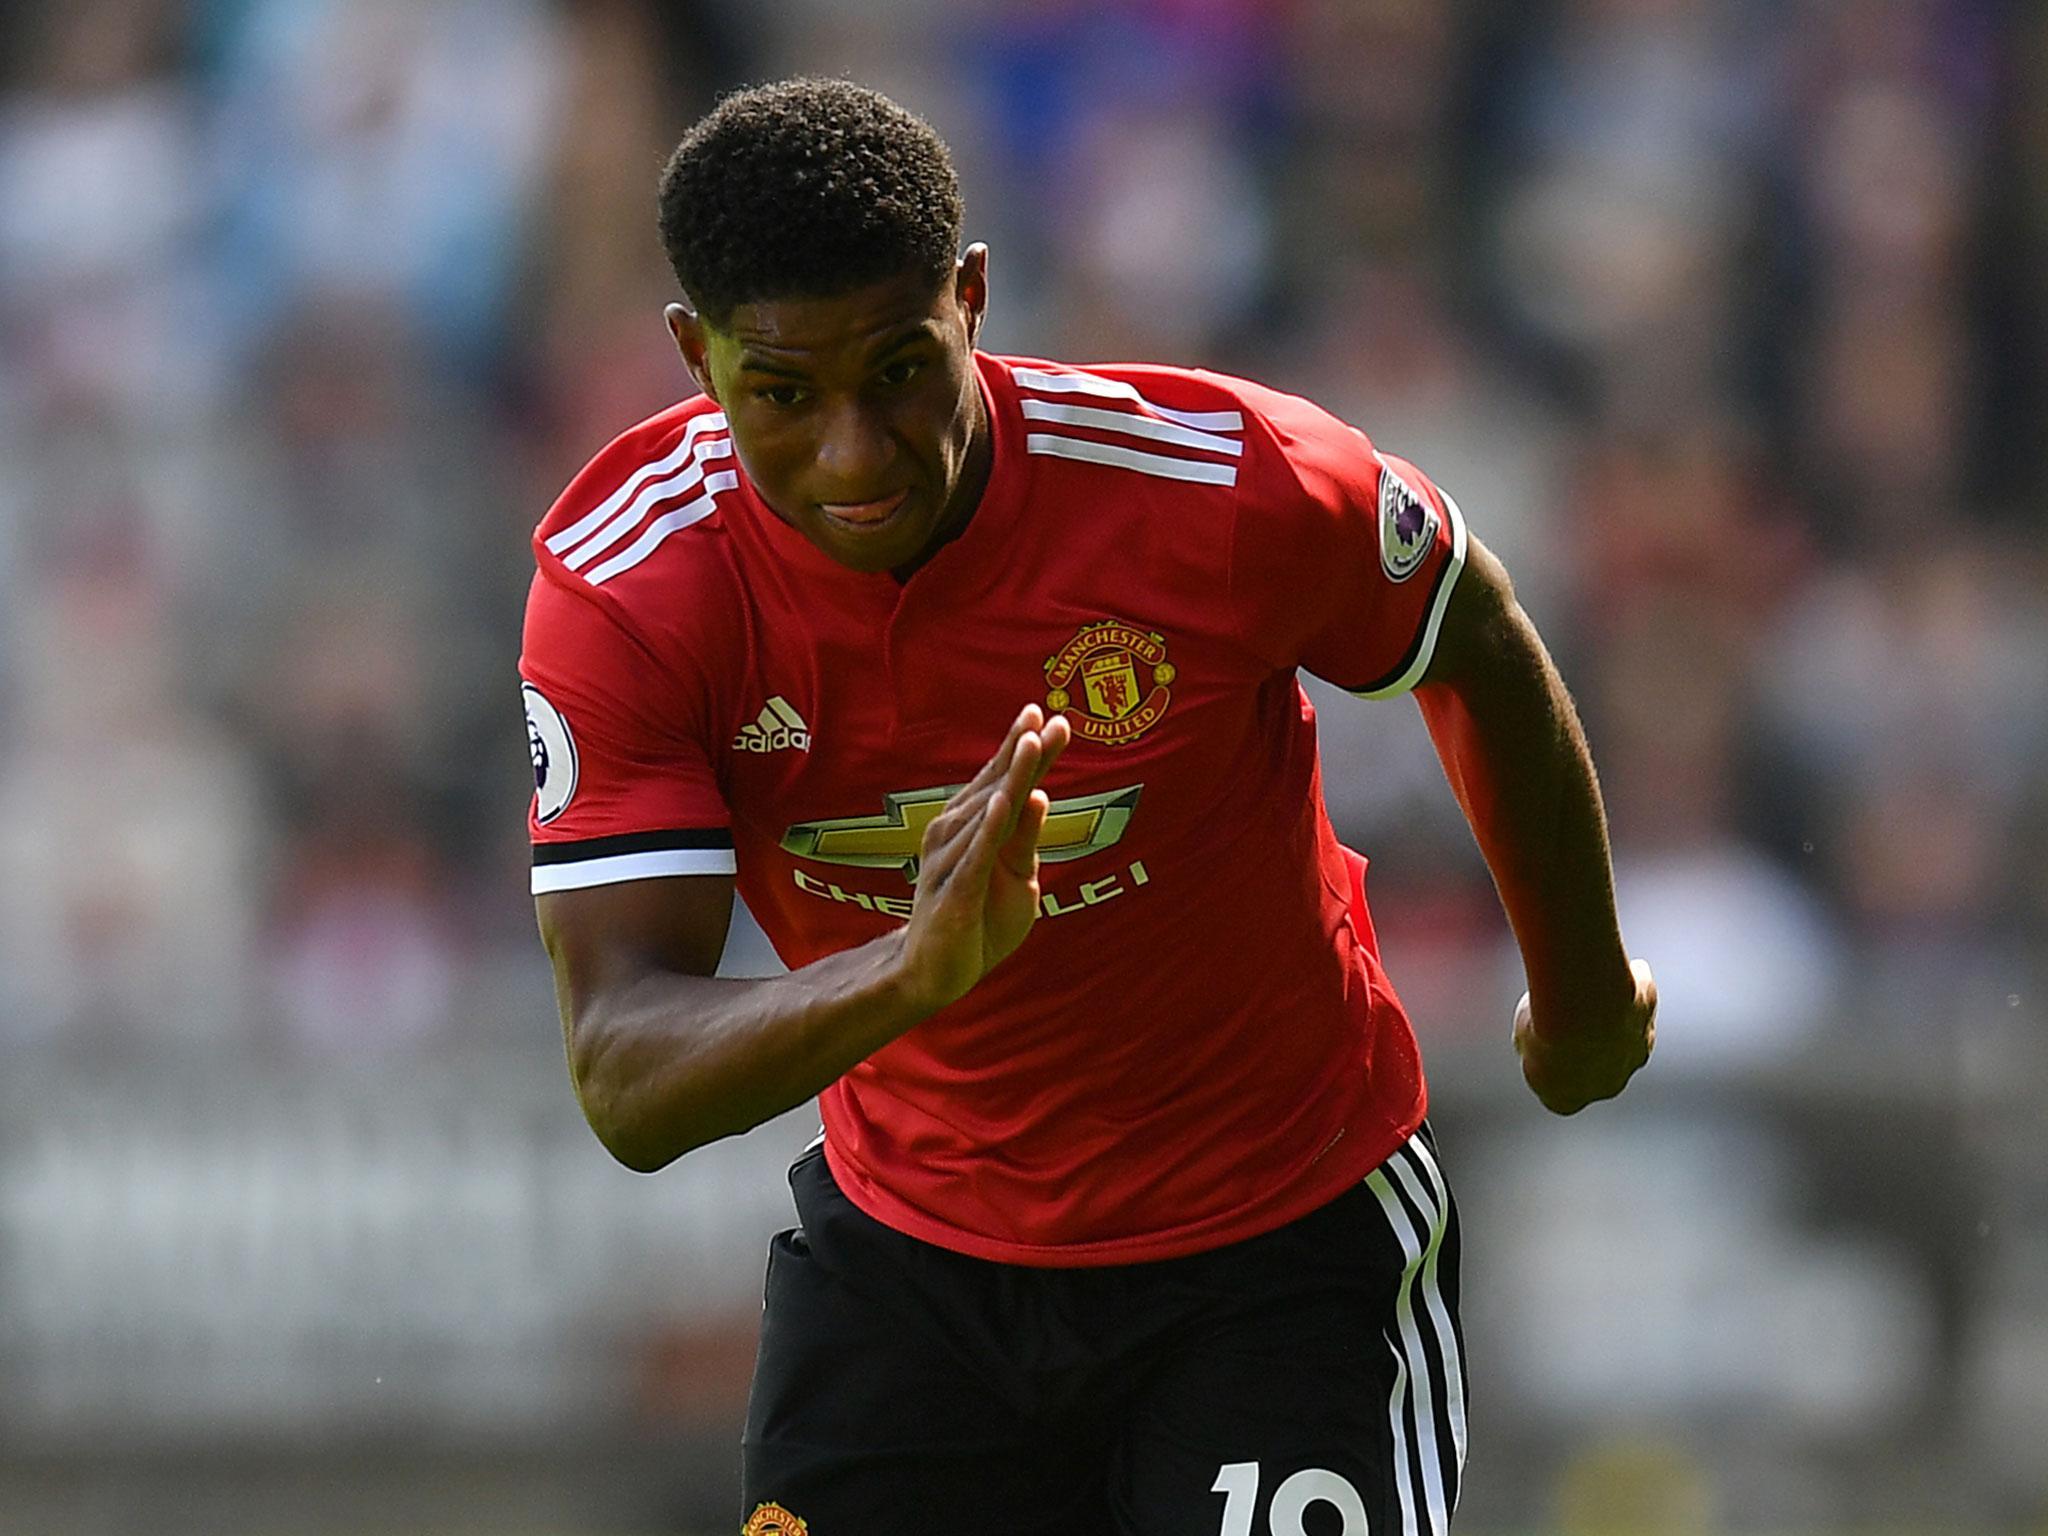 Gareth Southgate has been impressed with Marcus Rashford's start to the season